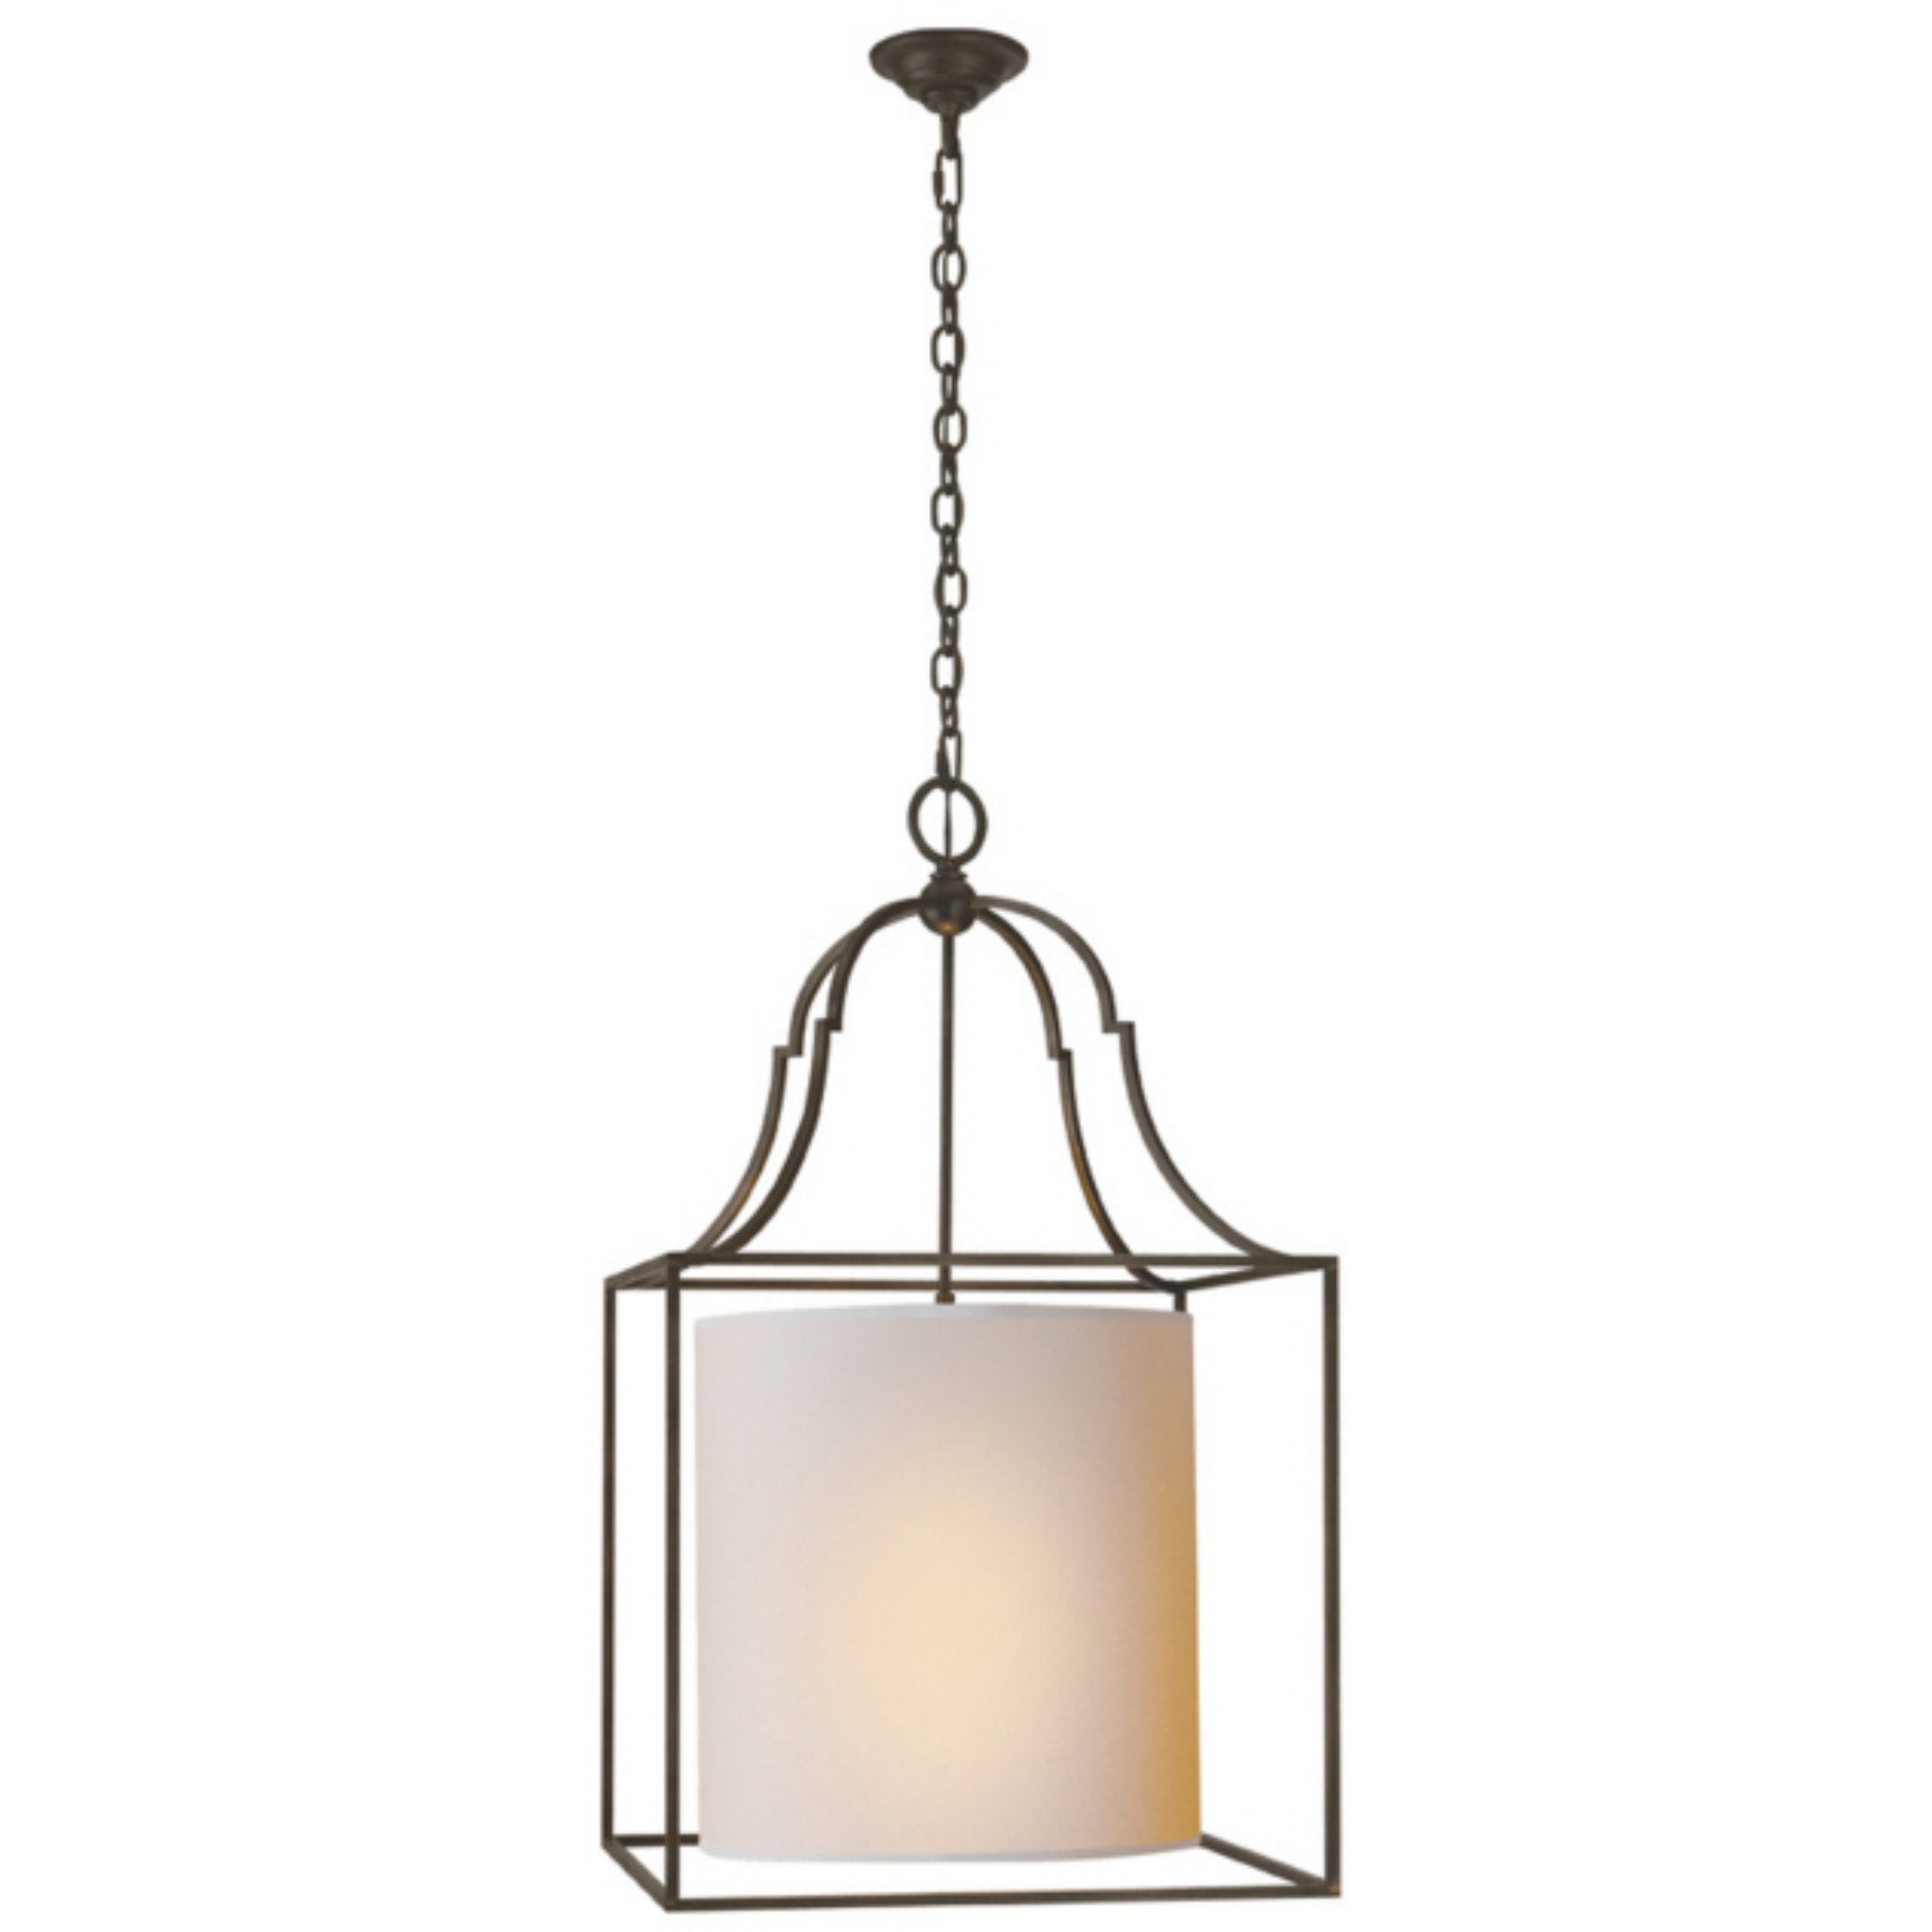 Chapman & Myers Gustavian Lantern in Aged Iron with Natural Paper Shade